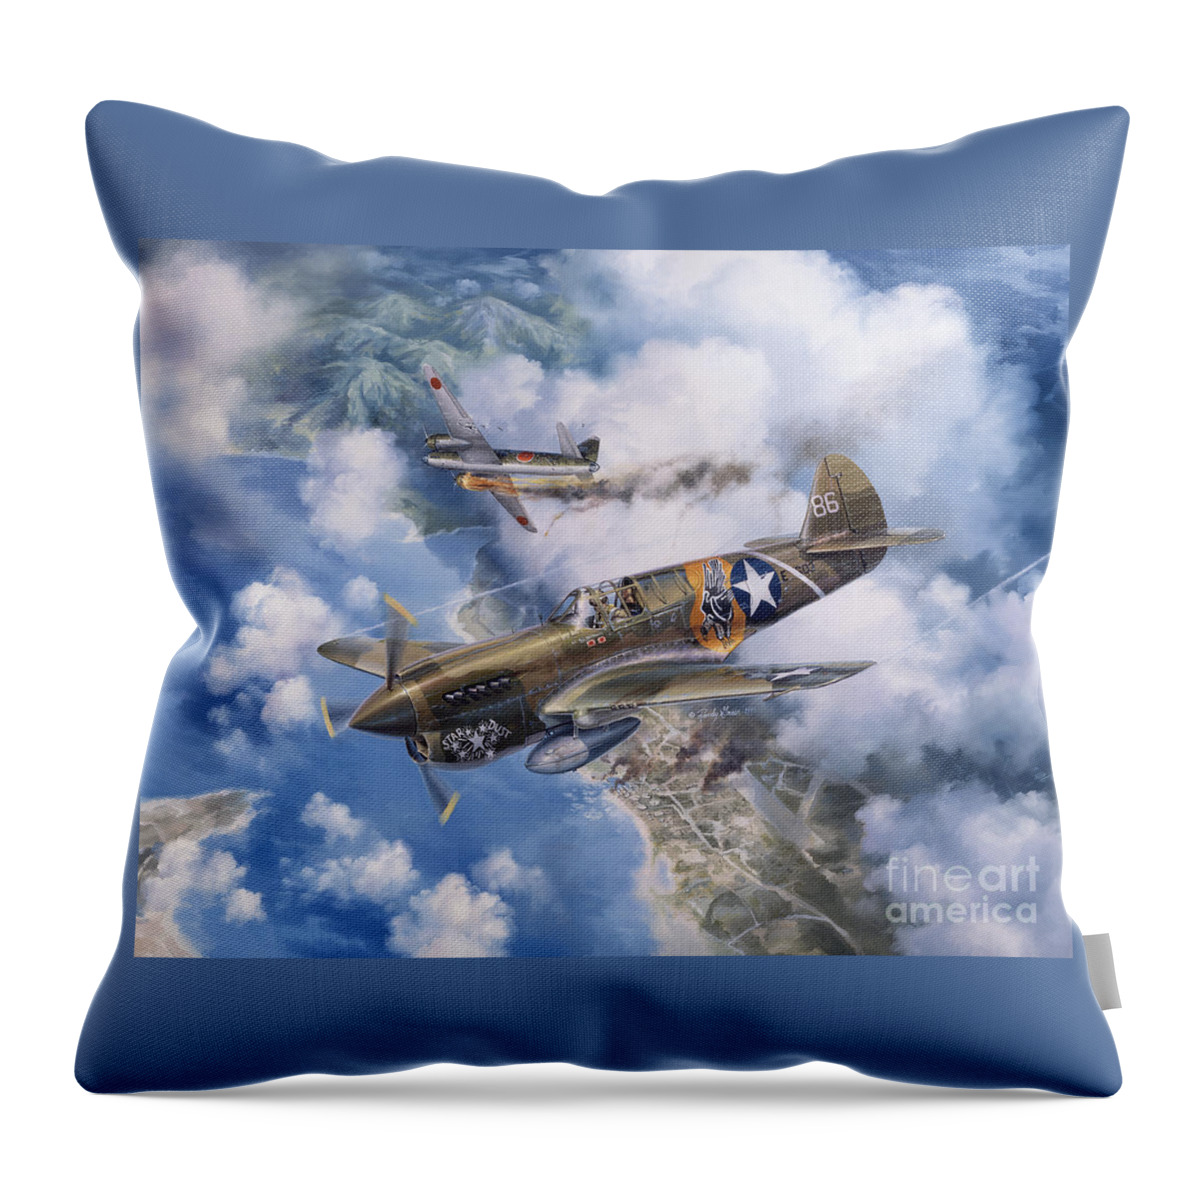 P-40 Warhawk Throw Pillow featuring the painting One Off At Darwin by Randy Green